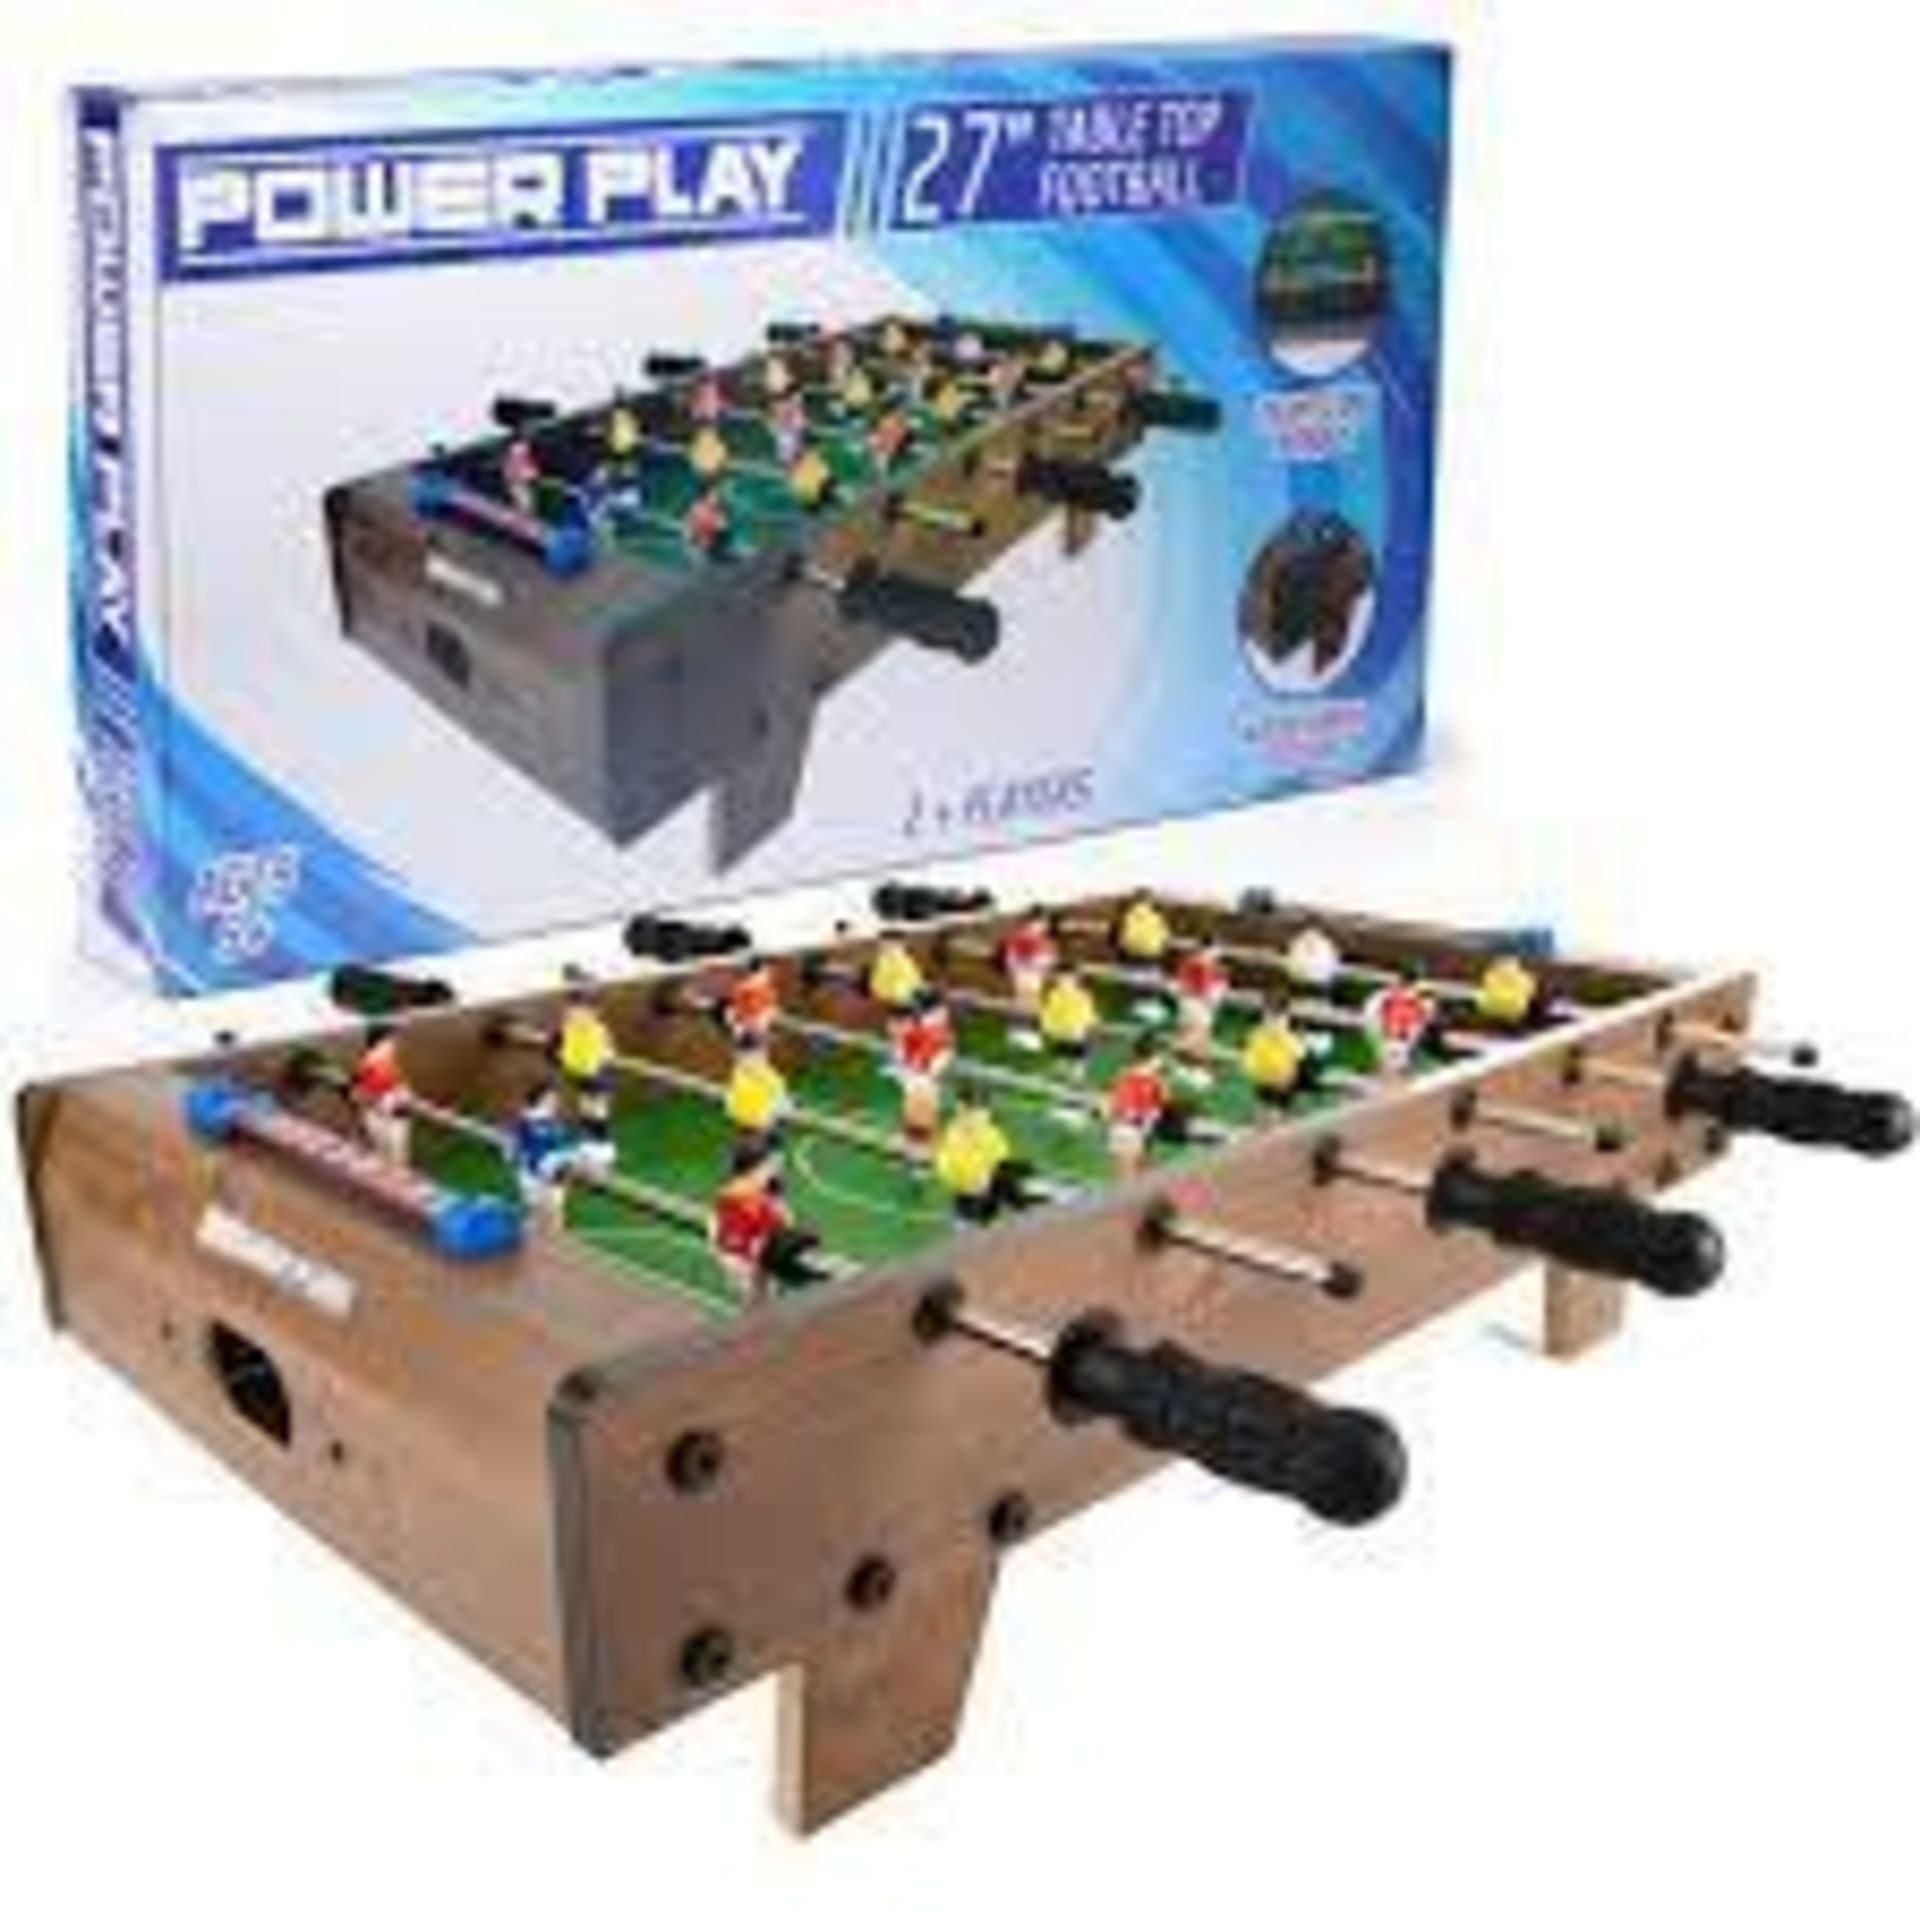 Power Play Table Top Football Game, 27 Inch